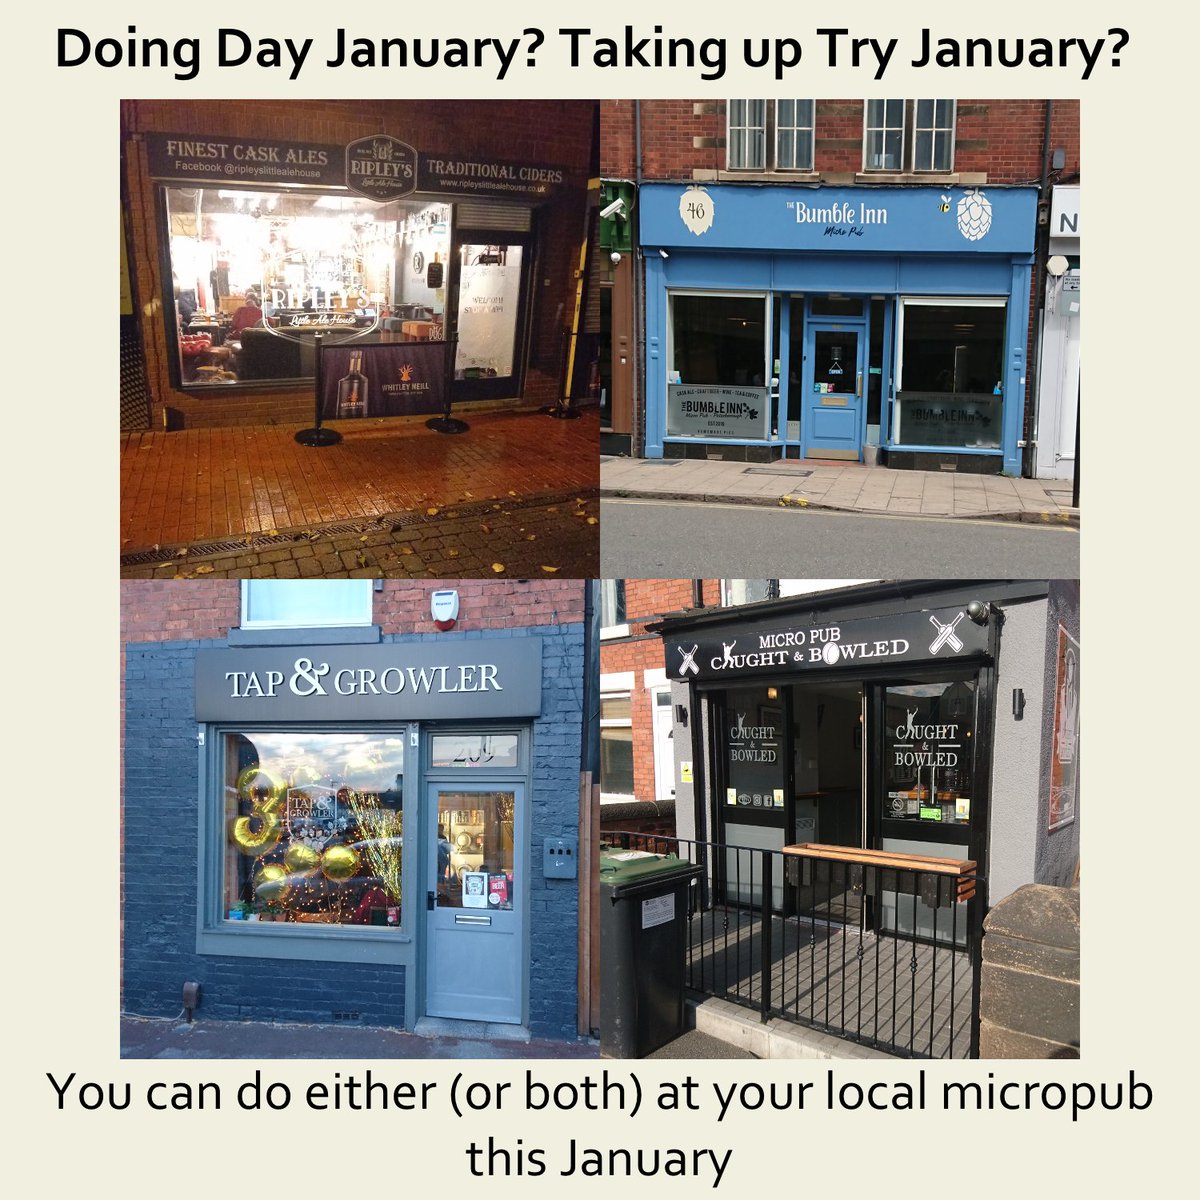 Are you planning on doing Dry January? Or maybe you're thinking of taking up Try January?

Whether it's Dry or Try, you can participate in either (or both) at your local micropub this January. 

#dryjanuary #tryjanuary #micropub #micropubs #smallbusiness #localbusiness